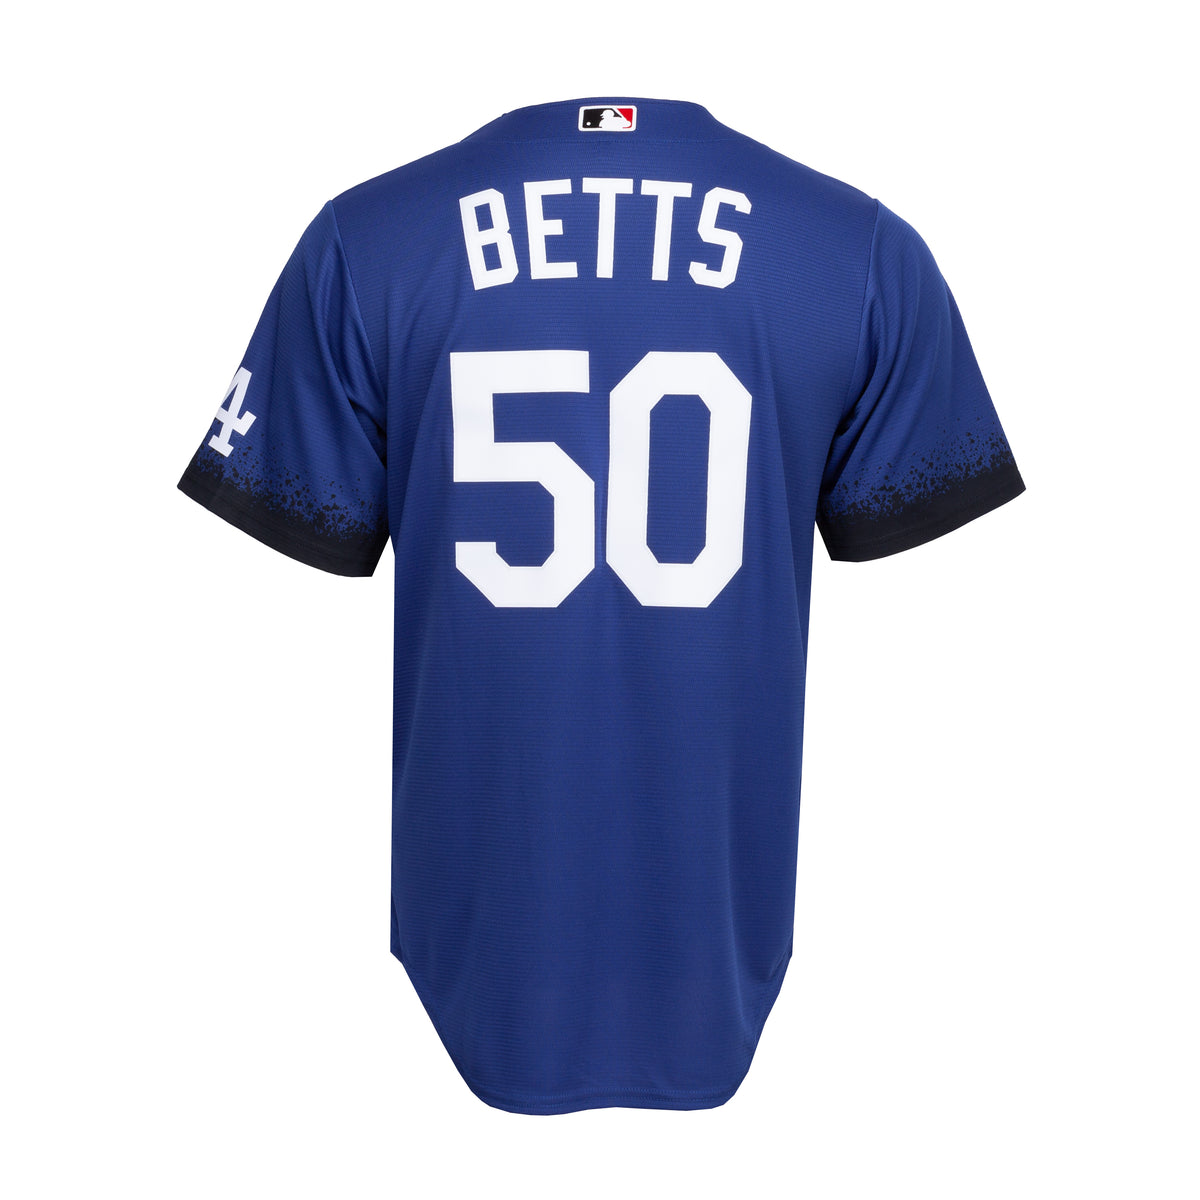 mookie betts official jersey